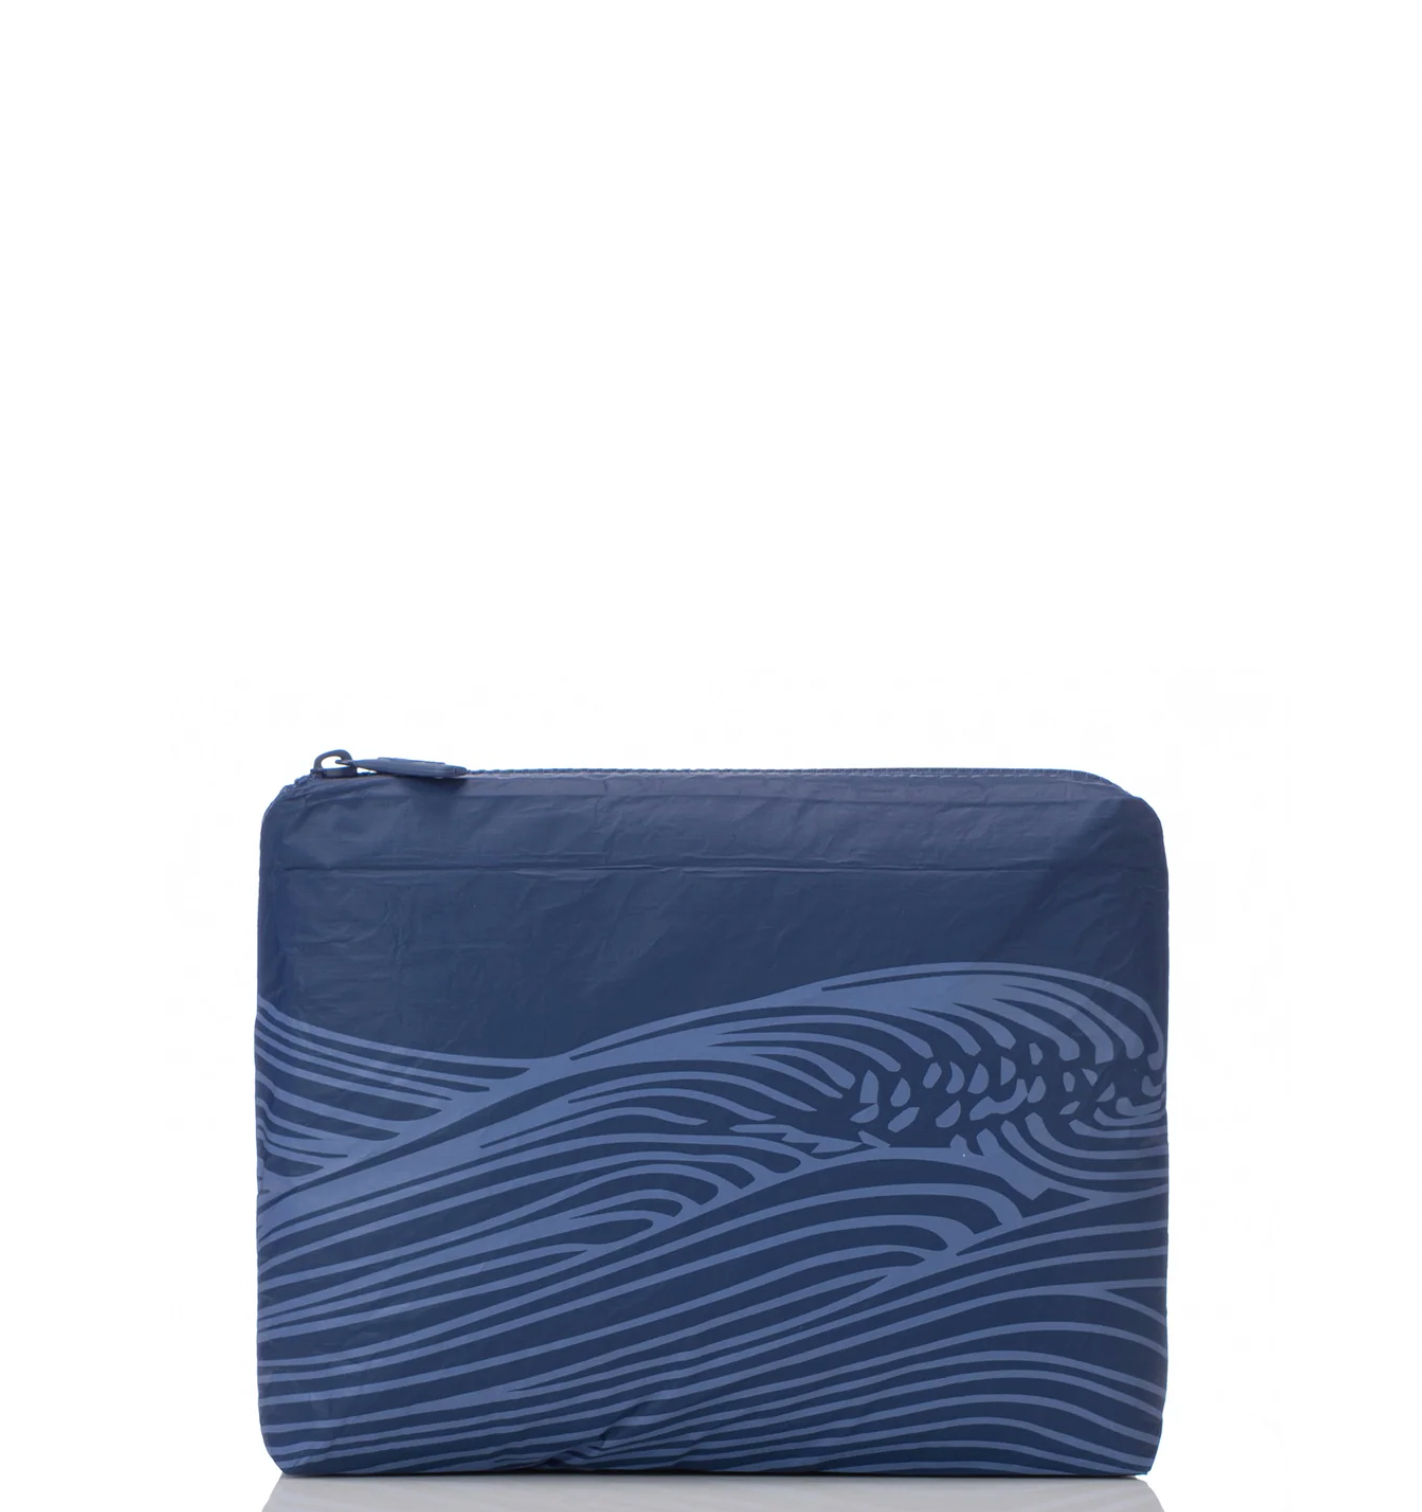 Sea Small Pouch / Currenton Navy